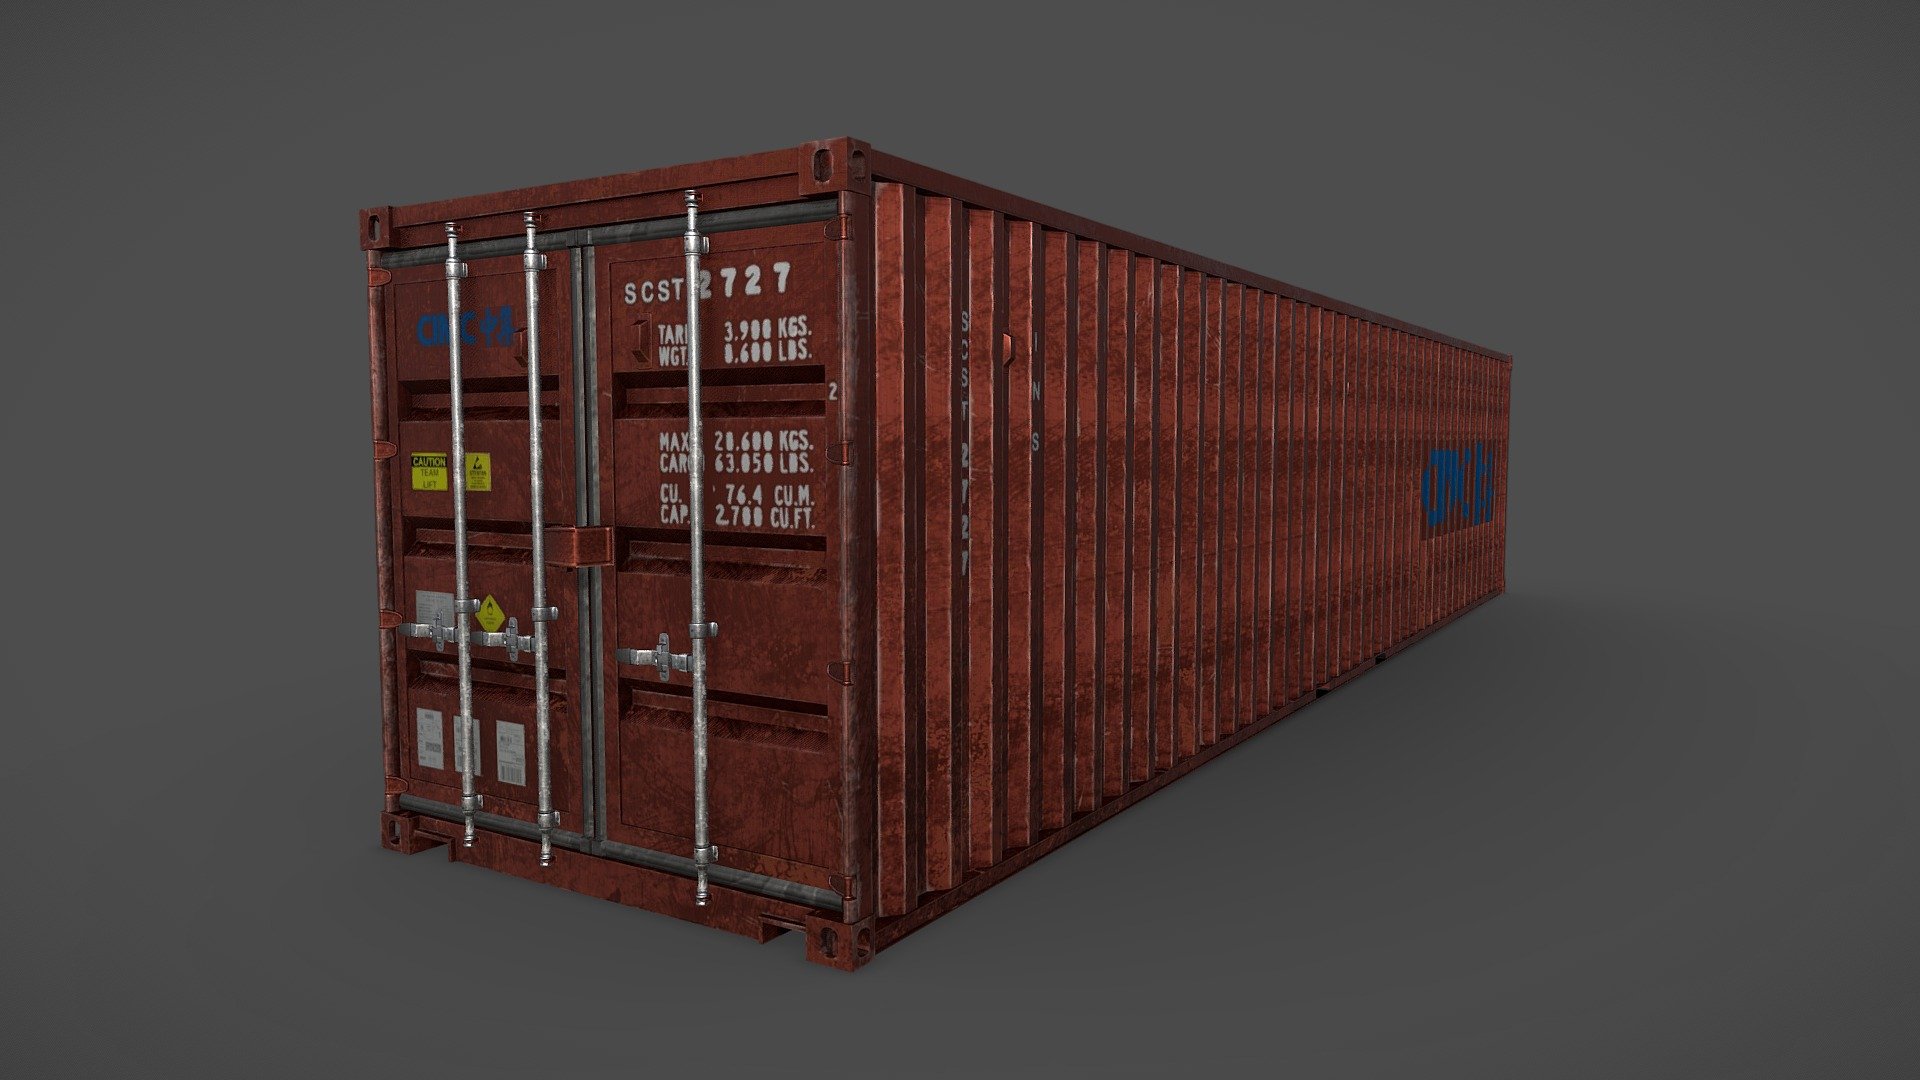 Classic Shipping Container - 40 feet.
There's nothing this container can't contain.
The pack contains-
1. FBX File
2. Textures (4K resolution)
:) - Shipping Container (40feet) - Buy Royalty Free 3D model by NeowLite 3d model